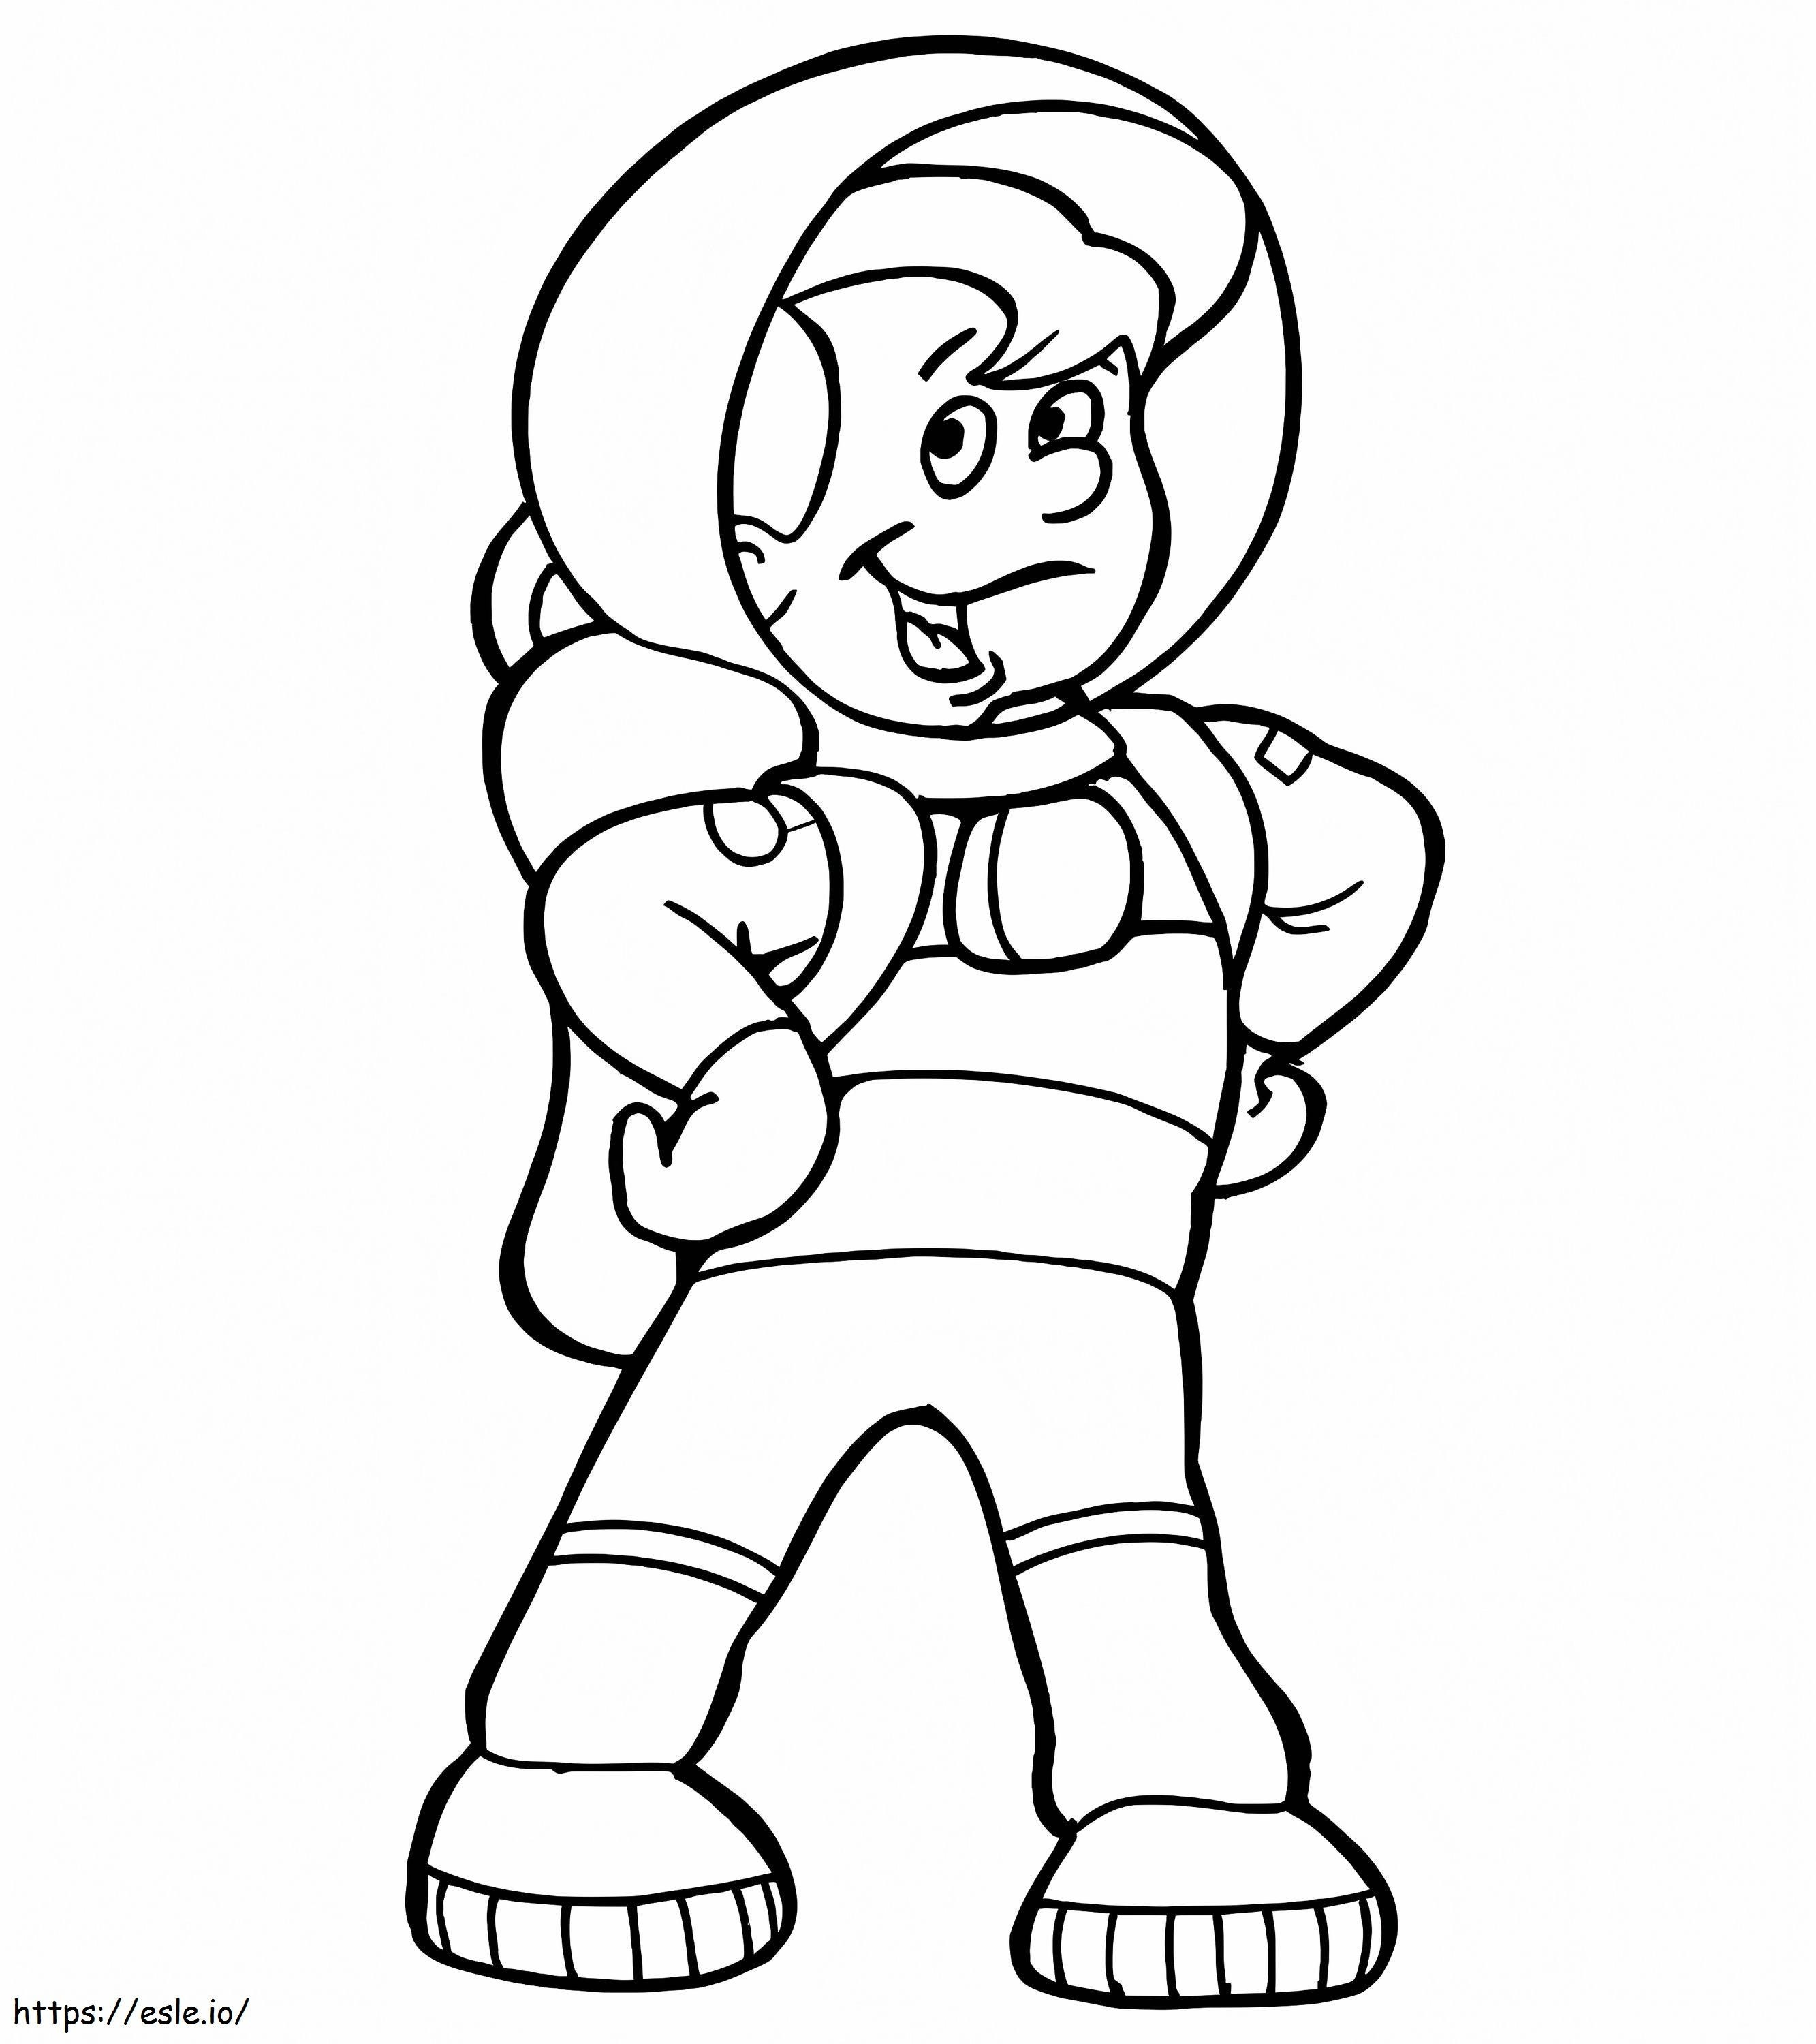 Funny Astronaut Boy coloring page